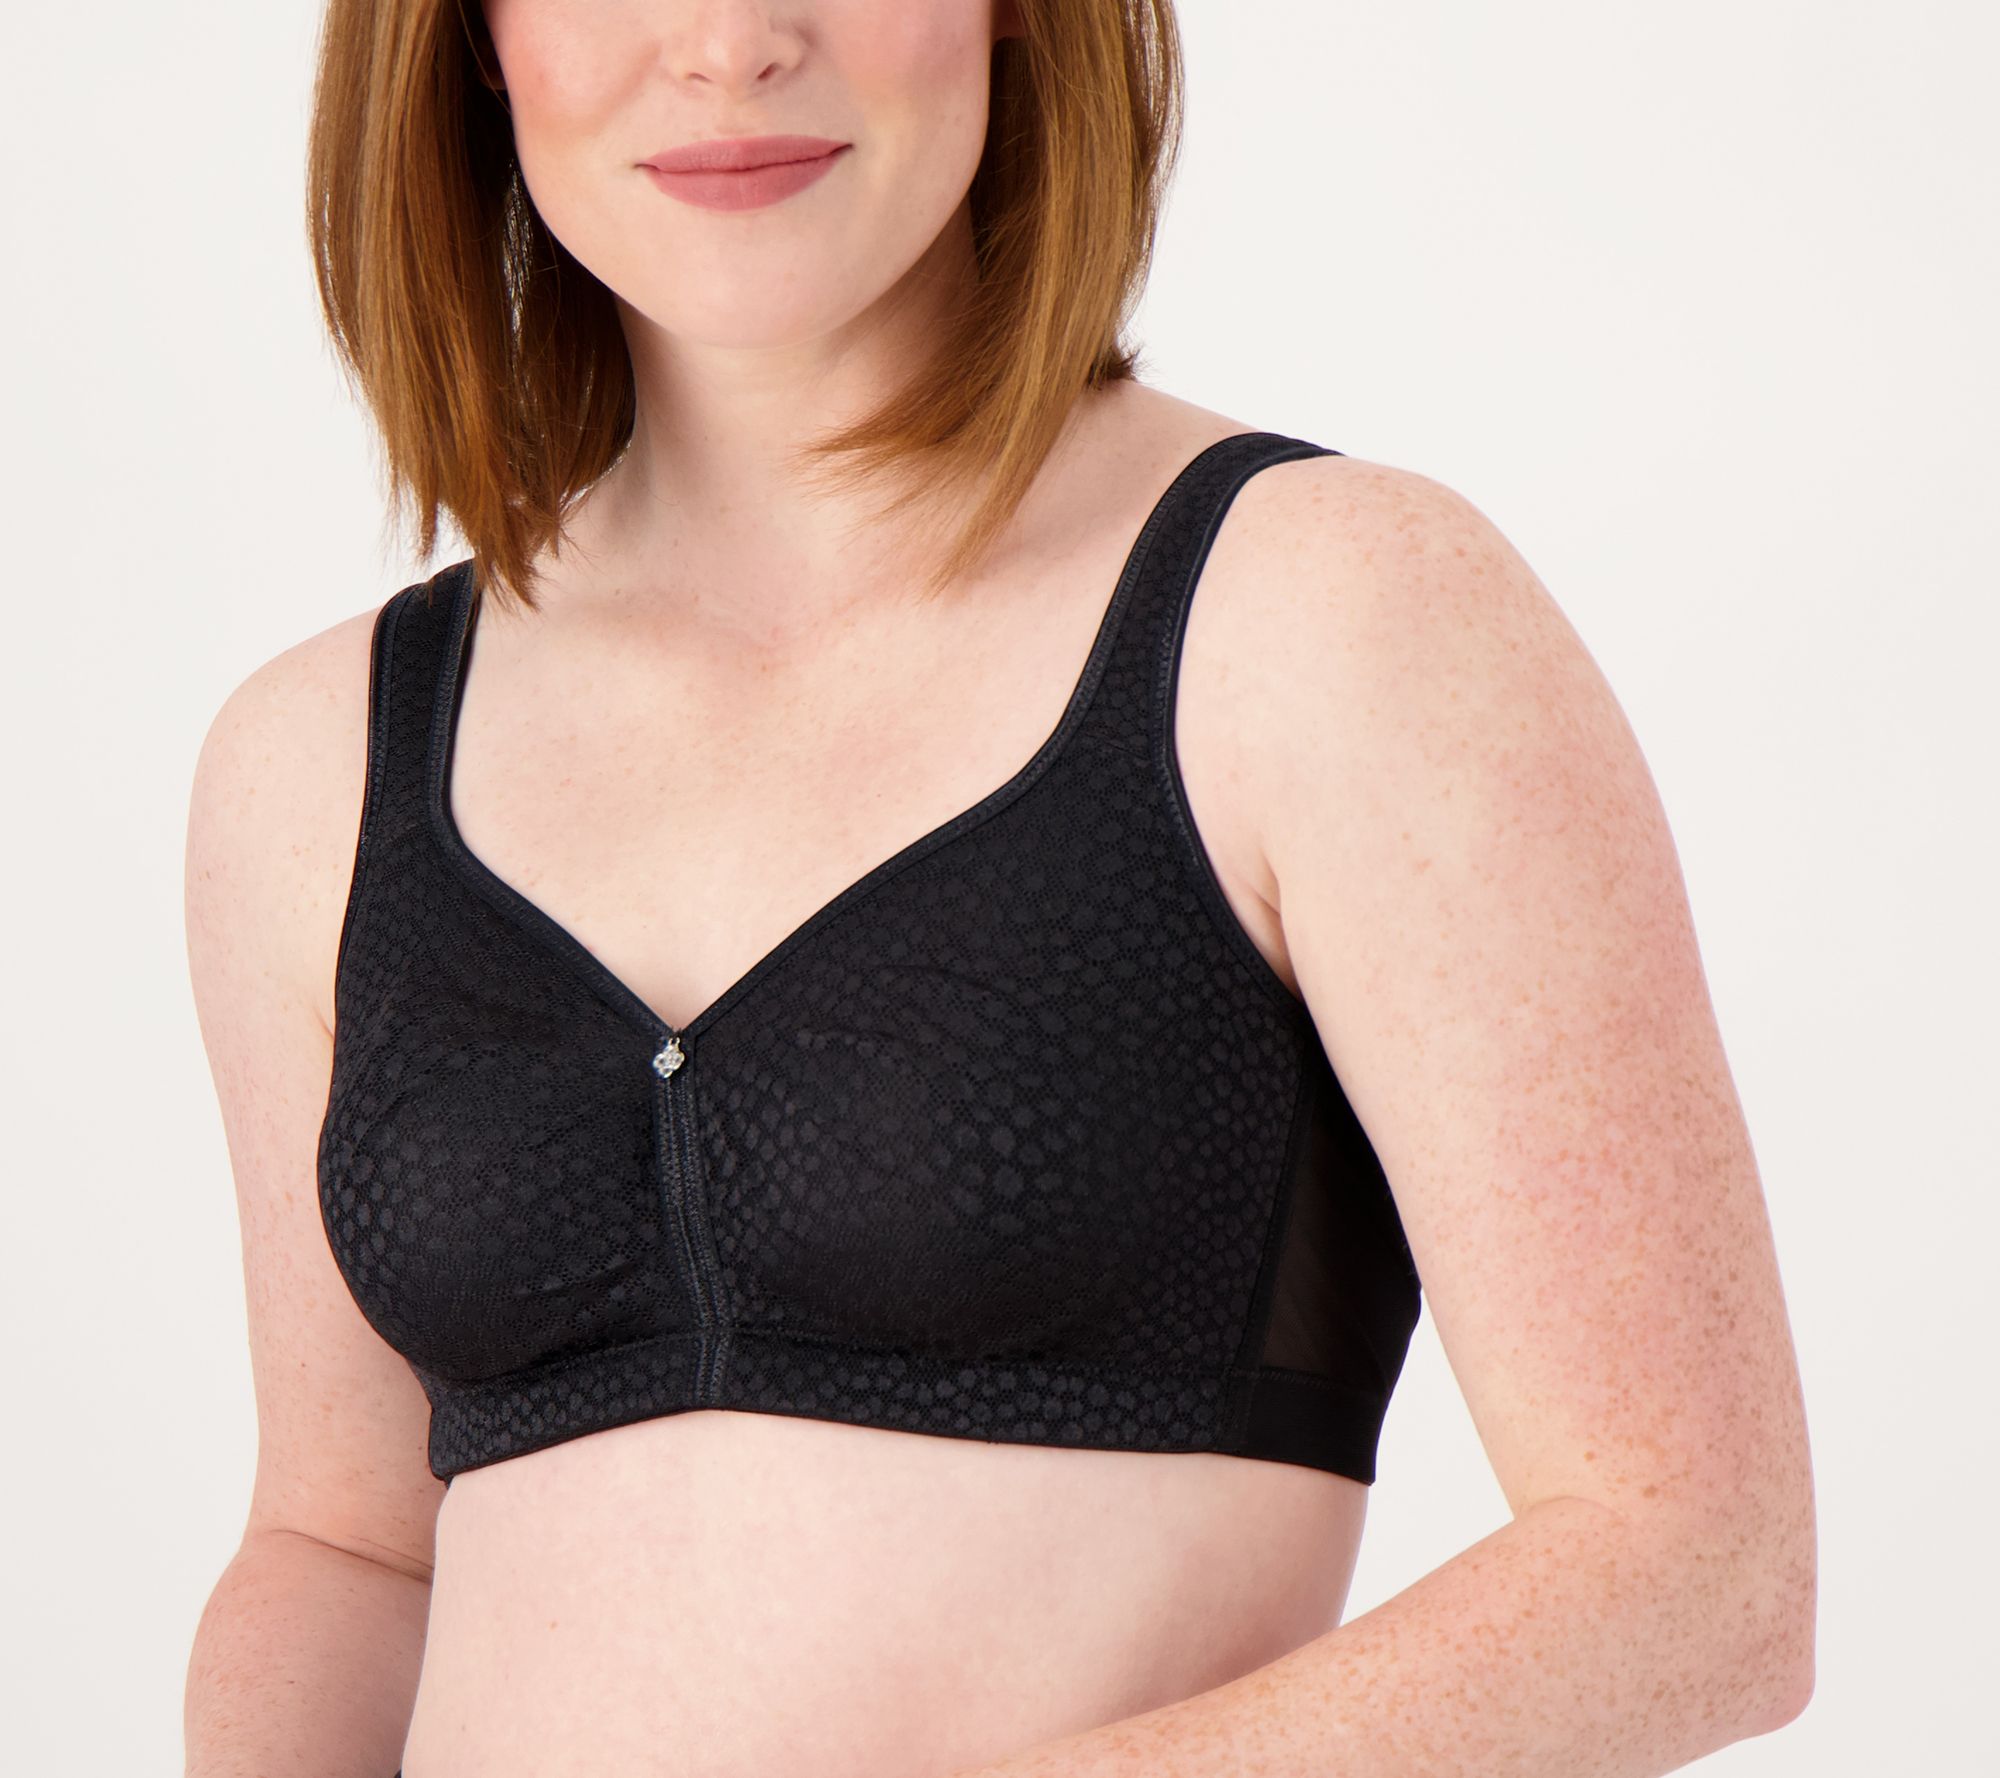 Bali Double Support Wireless Bra, Lace Bra with Stay-in-Place